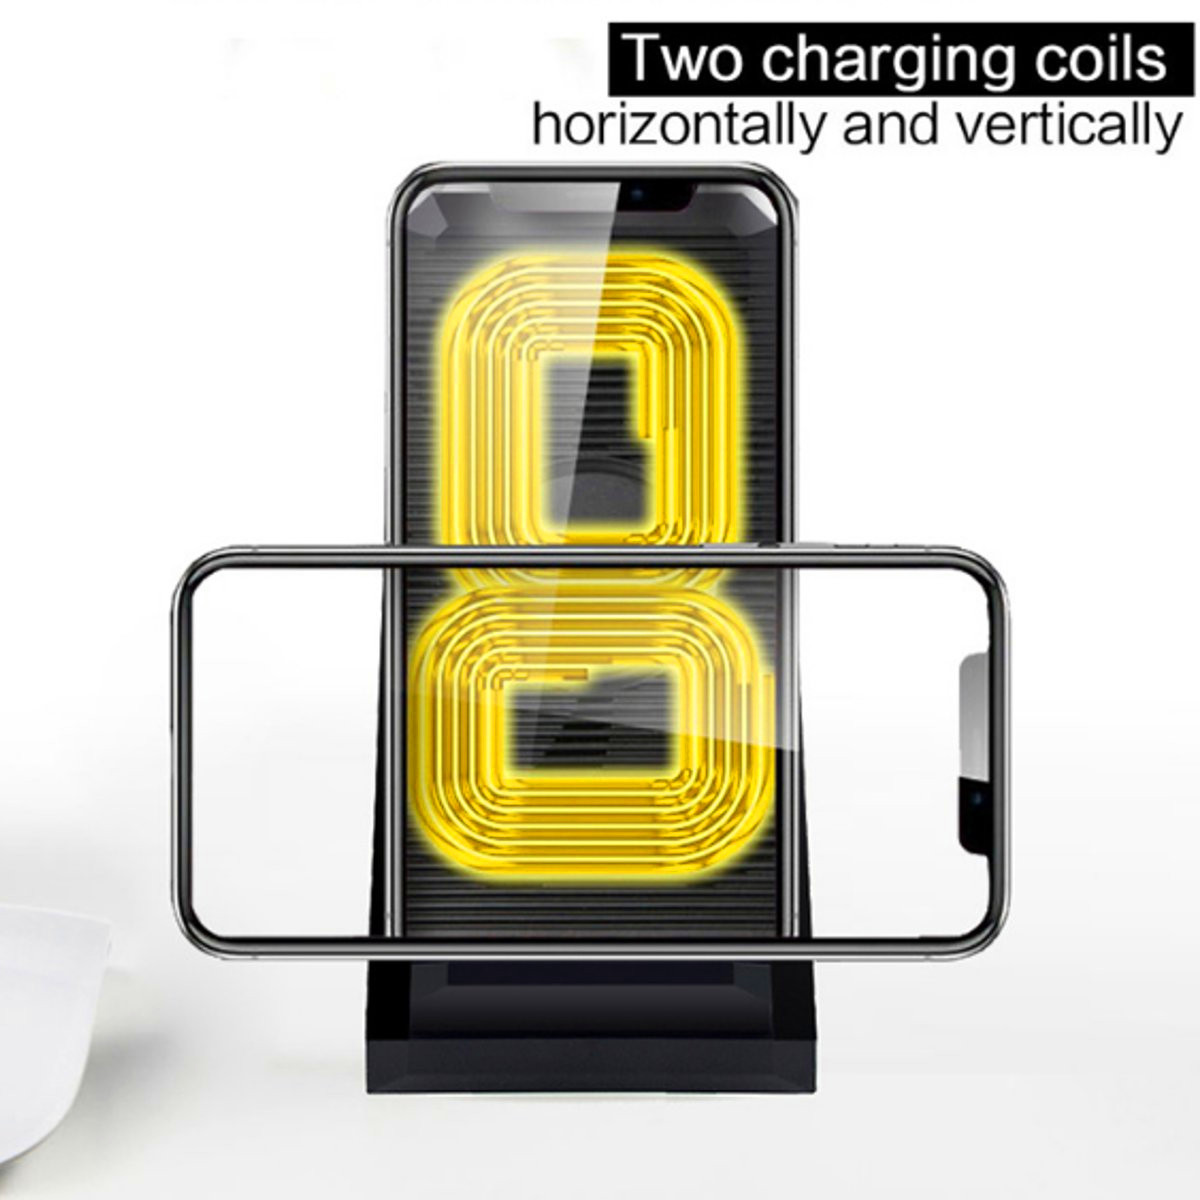 10W-Qi-Wireless-Charger-Fast-Charging-With-Cooling-Fan-Phone-Holder-For-iPhone-Samsung-Huawei-1422834-4